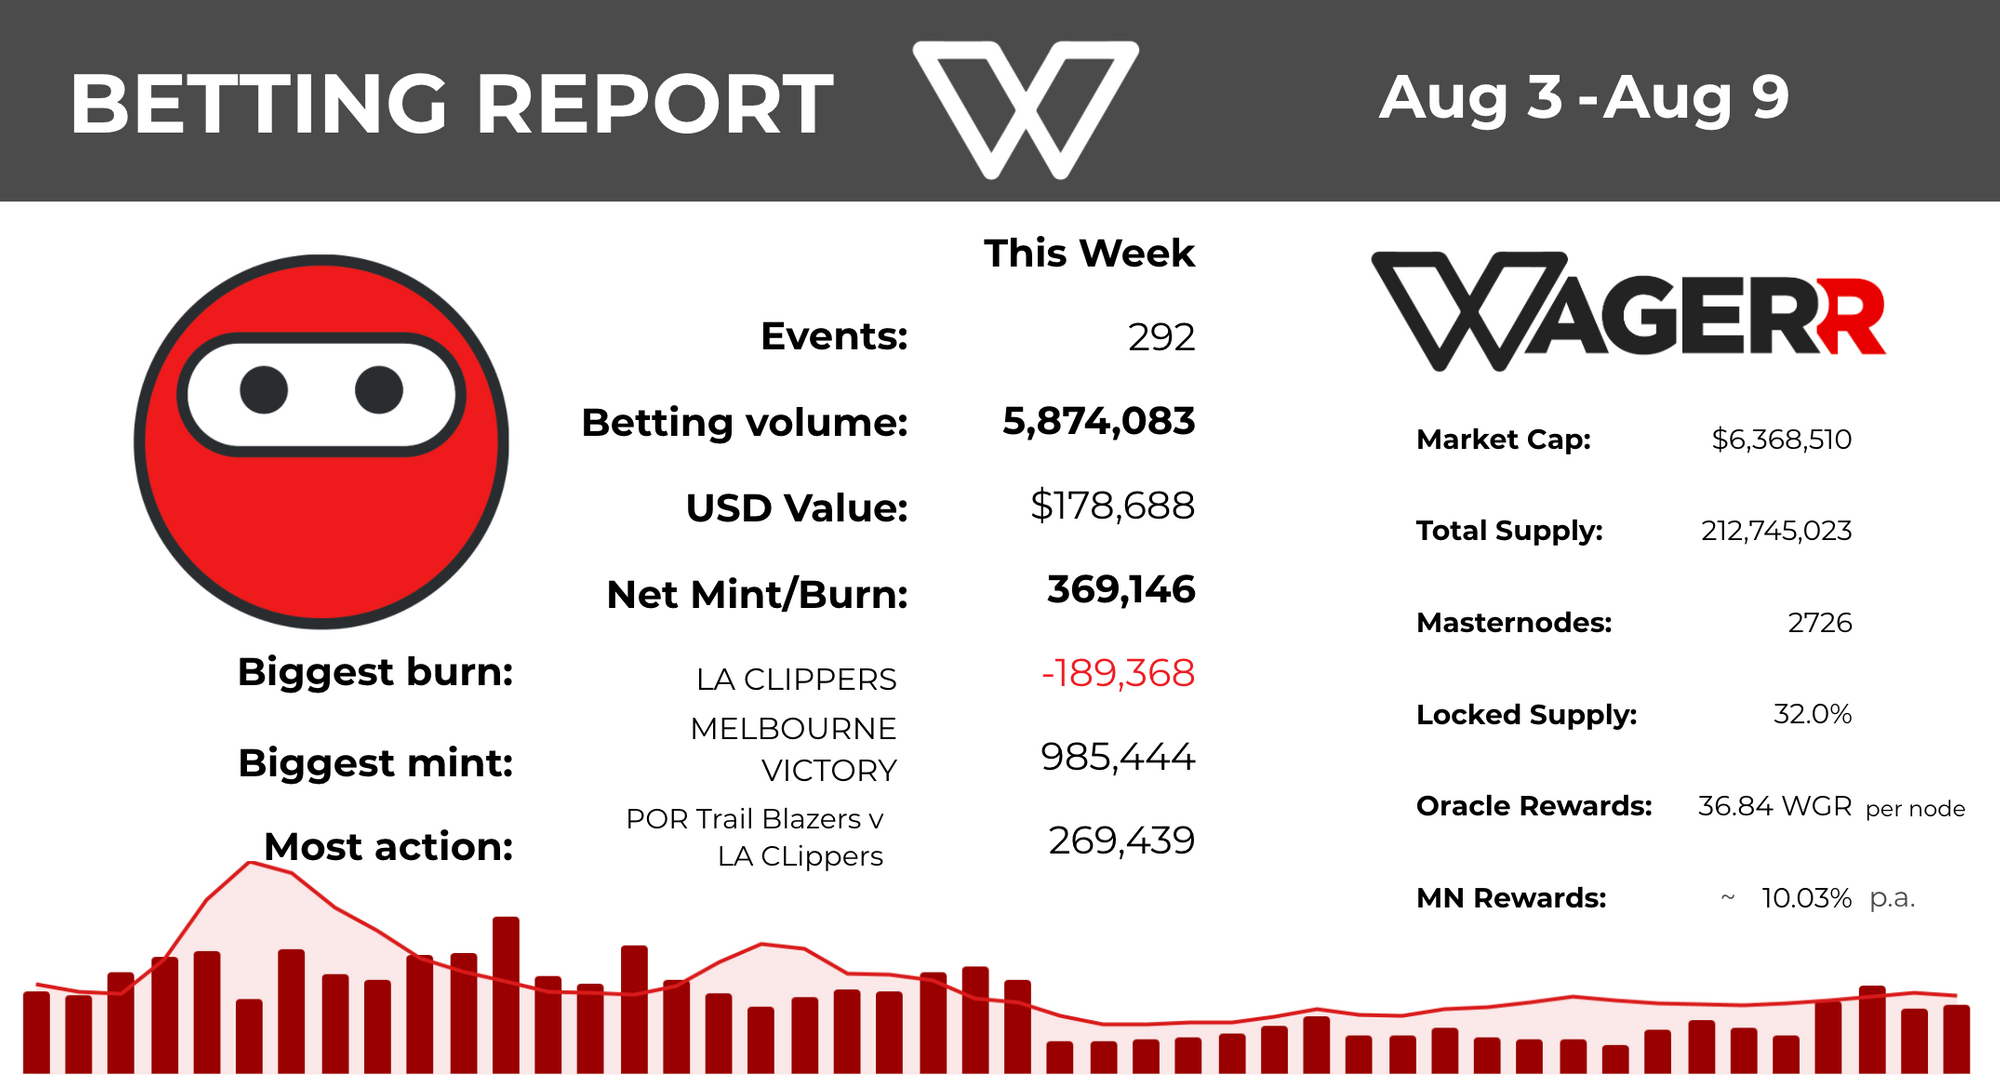 Wagerr Betting Report: August 9